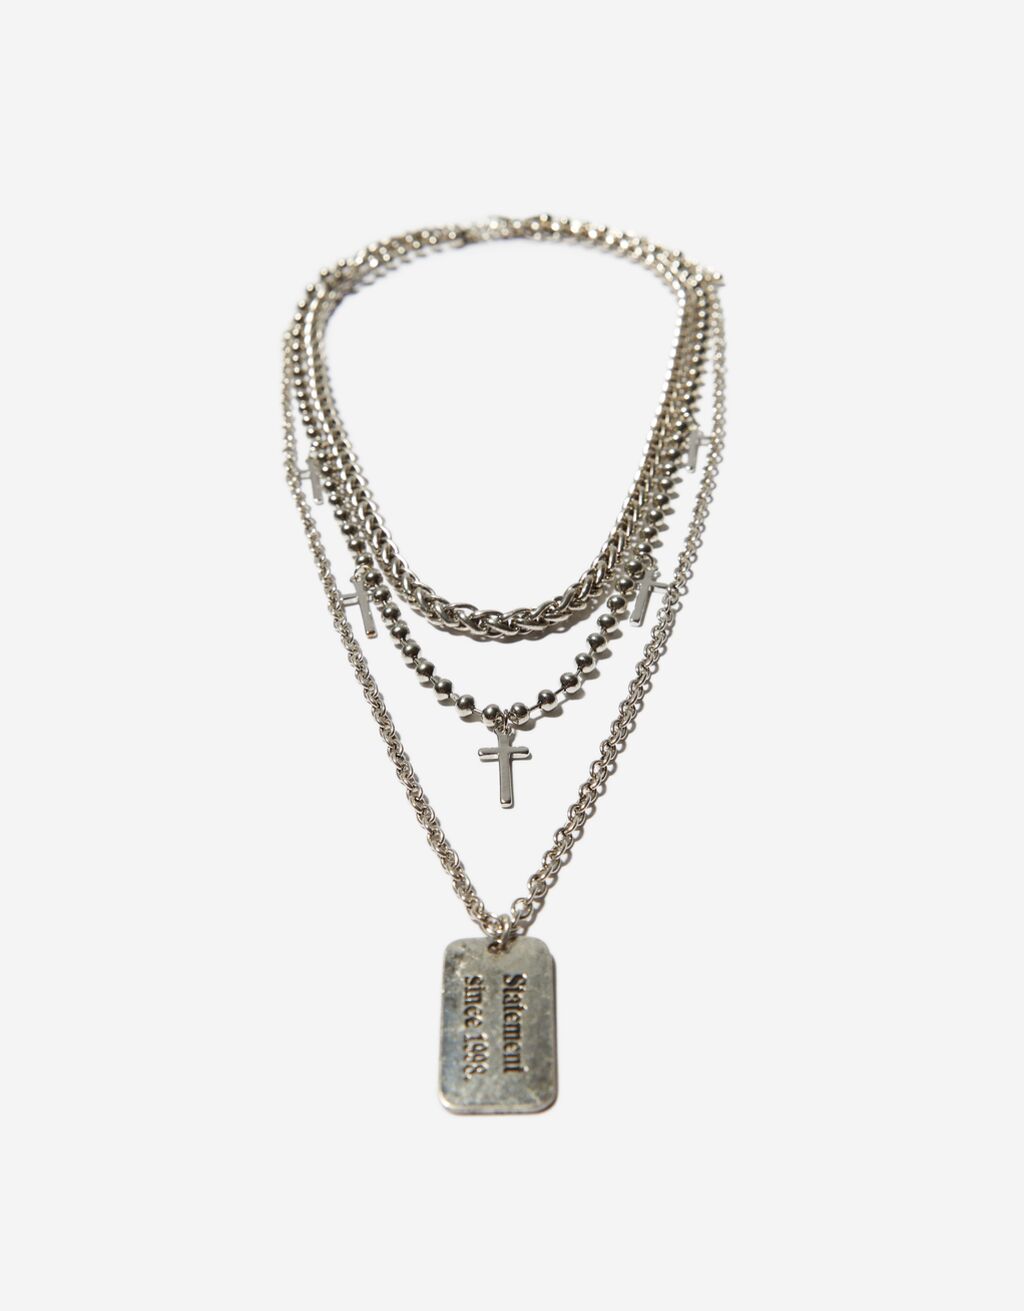 Necklace with cross pendants